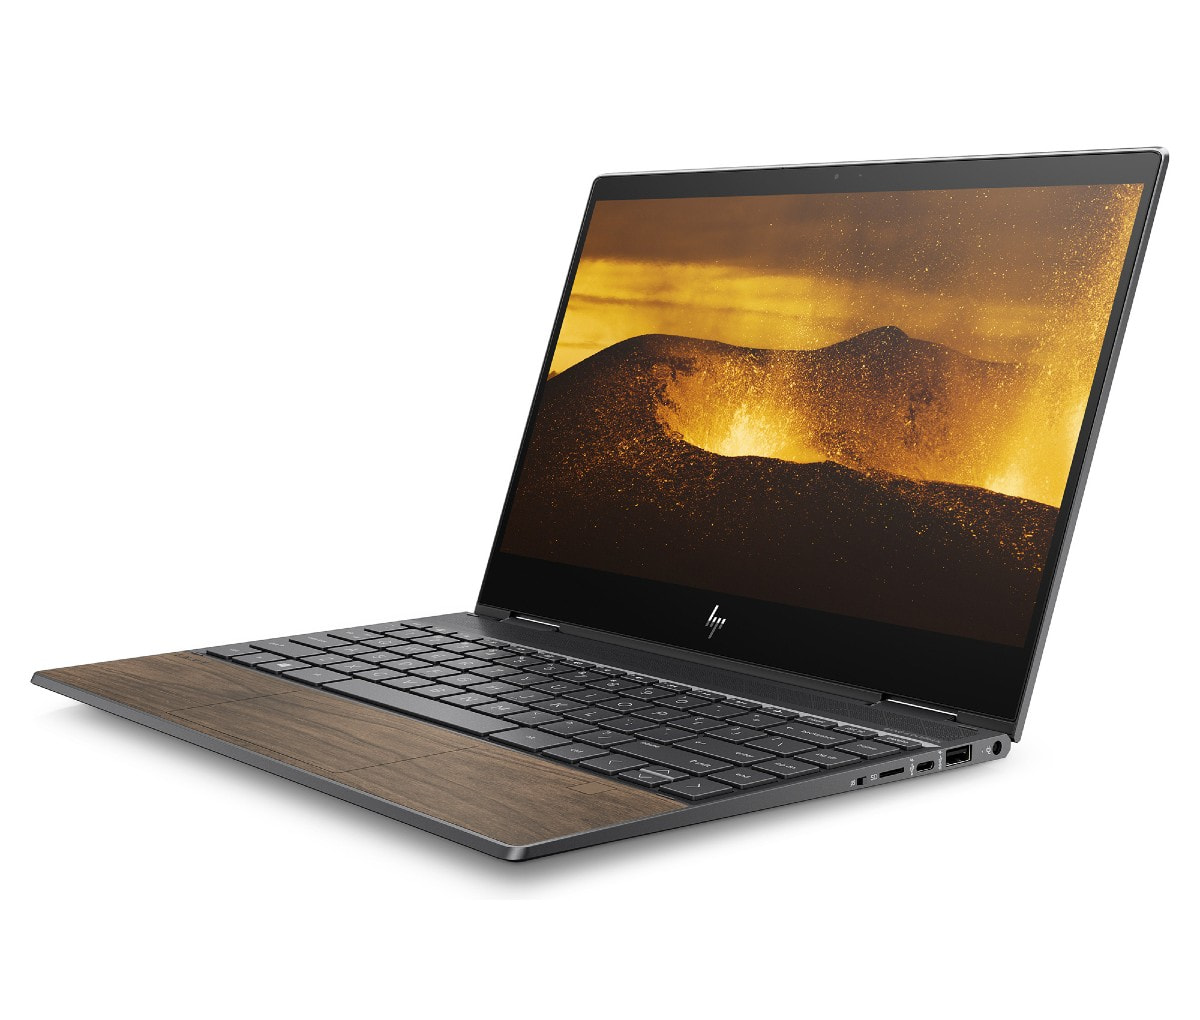 ENVY 13 x360」「ENVY 15 x360」HPのWin10搭載回転式2-in-1、パームレスト部分に天然木材採用 -  「最高のタブレット」を求めて！